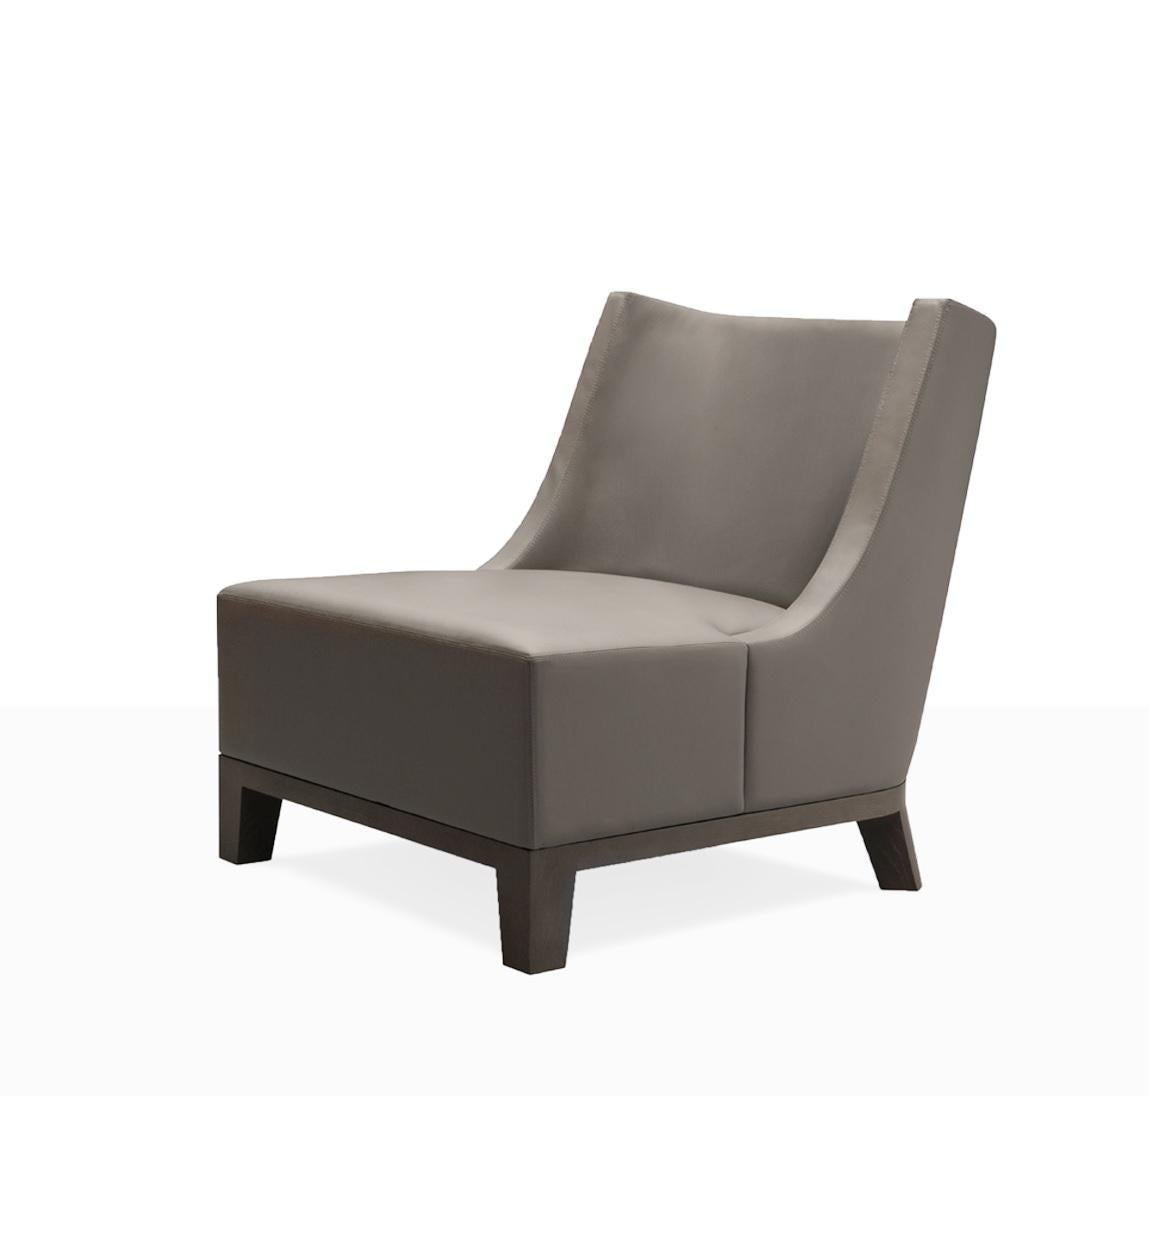 Carle lounge chair by LK Edition
Dimensions: 87.5 x 74.5 x H 81 cm
Materials: Leather and Wood. 


It is with the sense of detail and requirement, this research of the exception by the selection of noble materials and his culture of the French